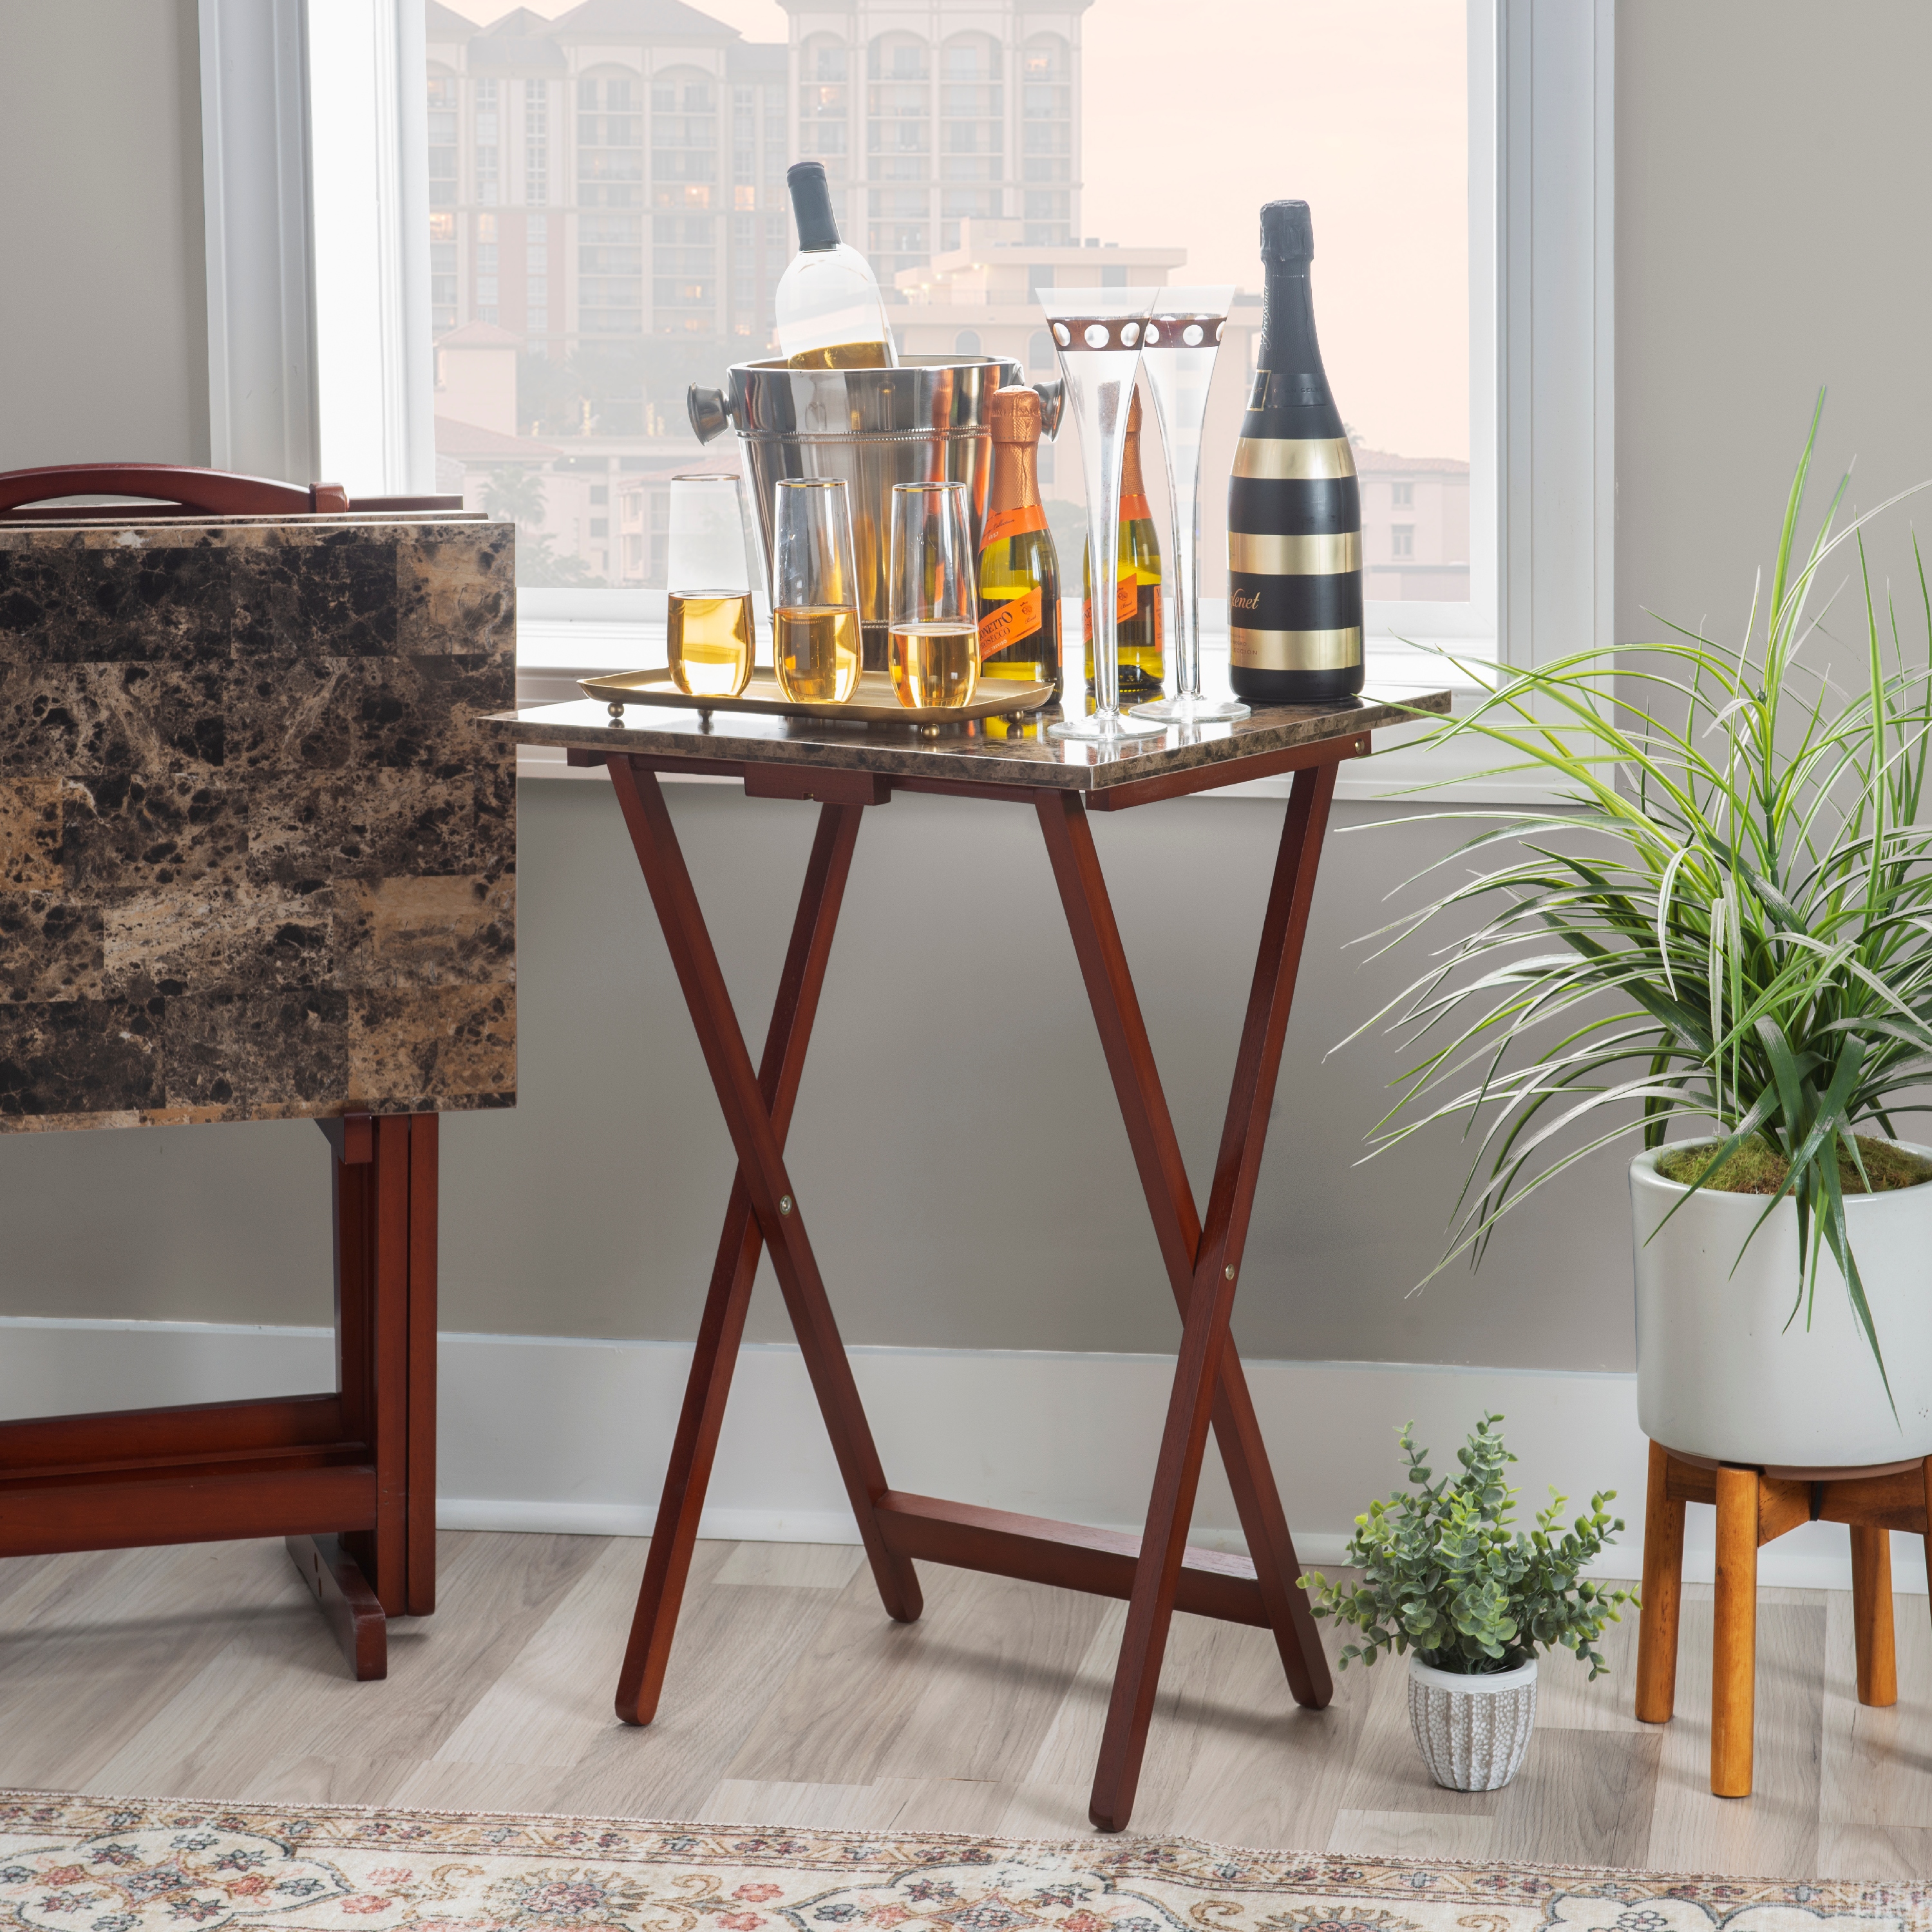 Linon Tray Table Set Faux Marble -Brown - image 1 of 5